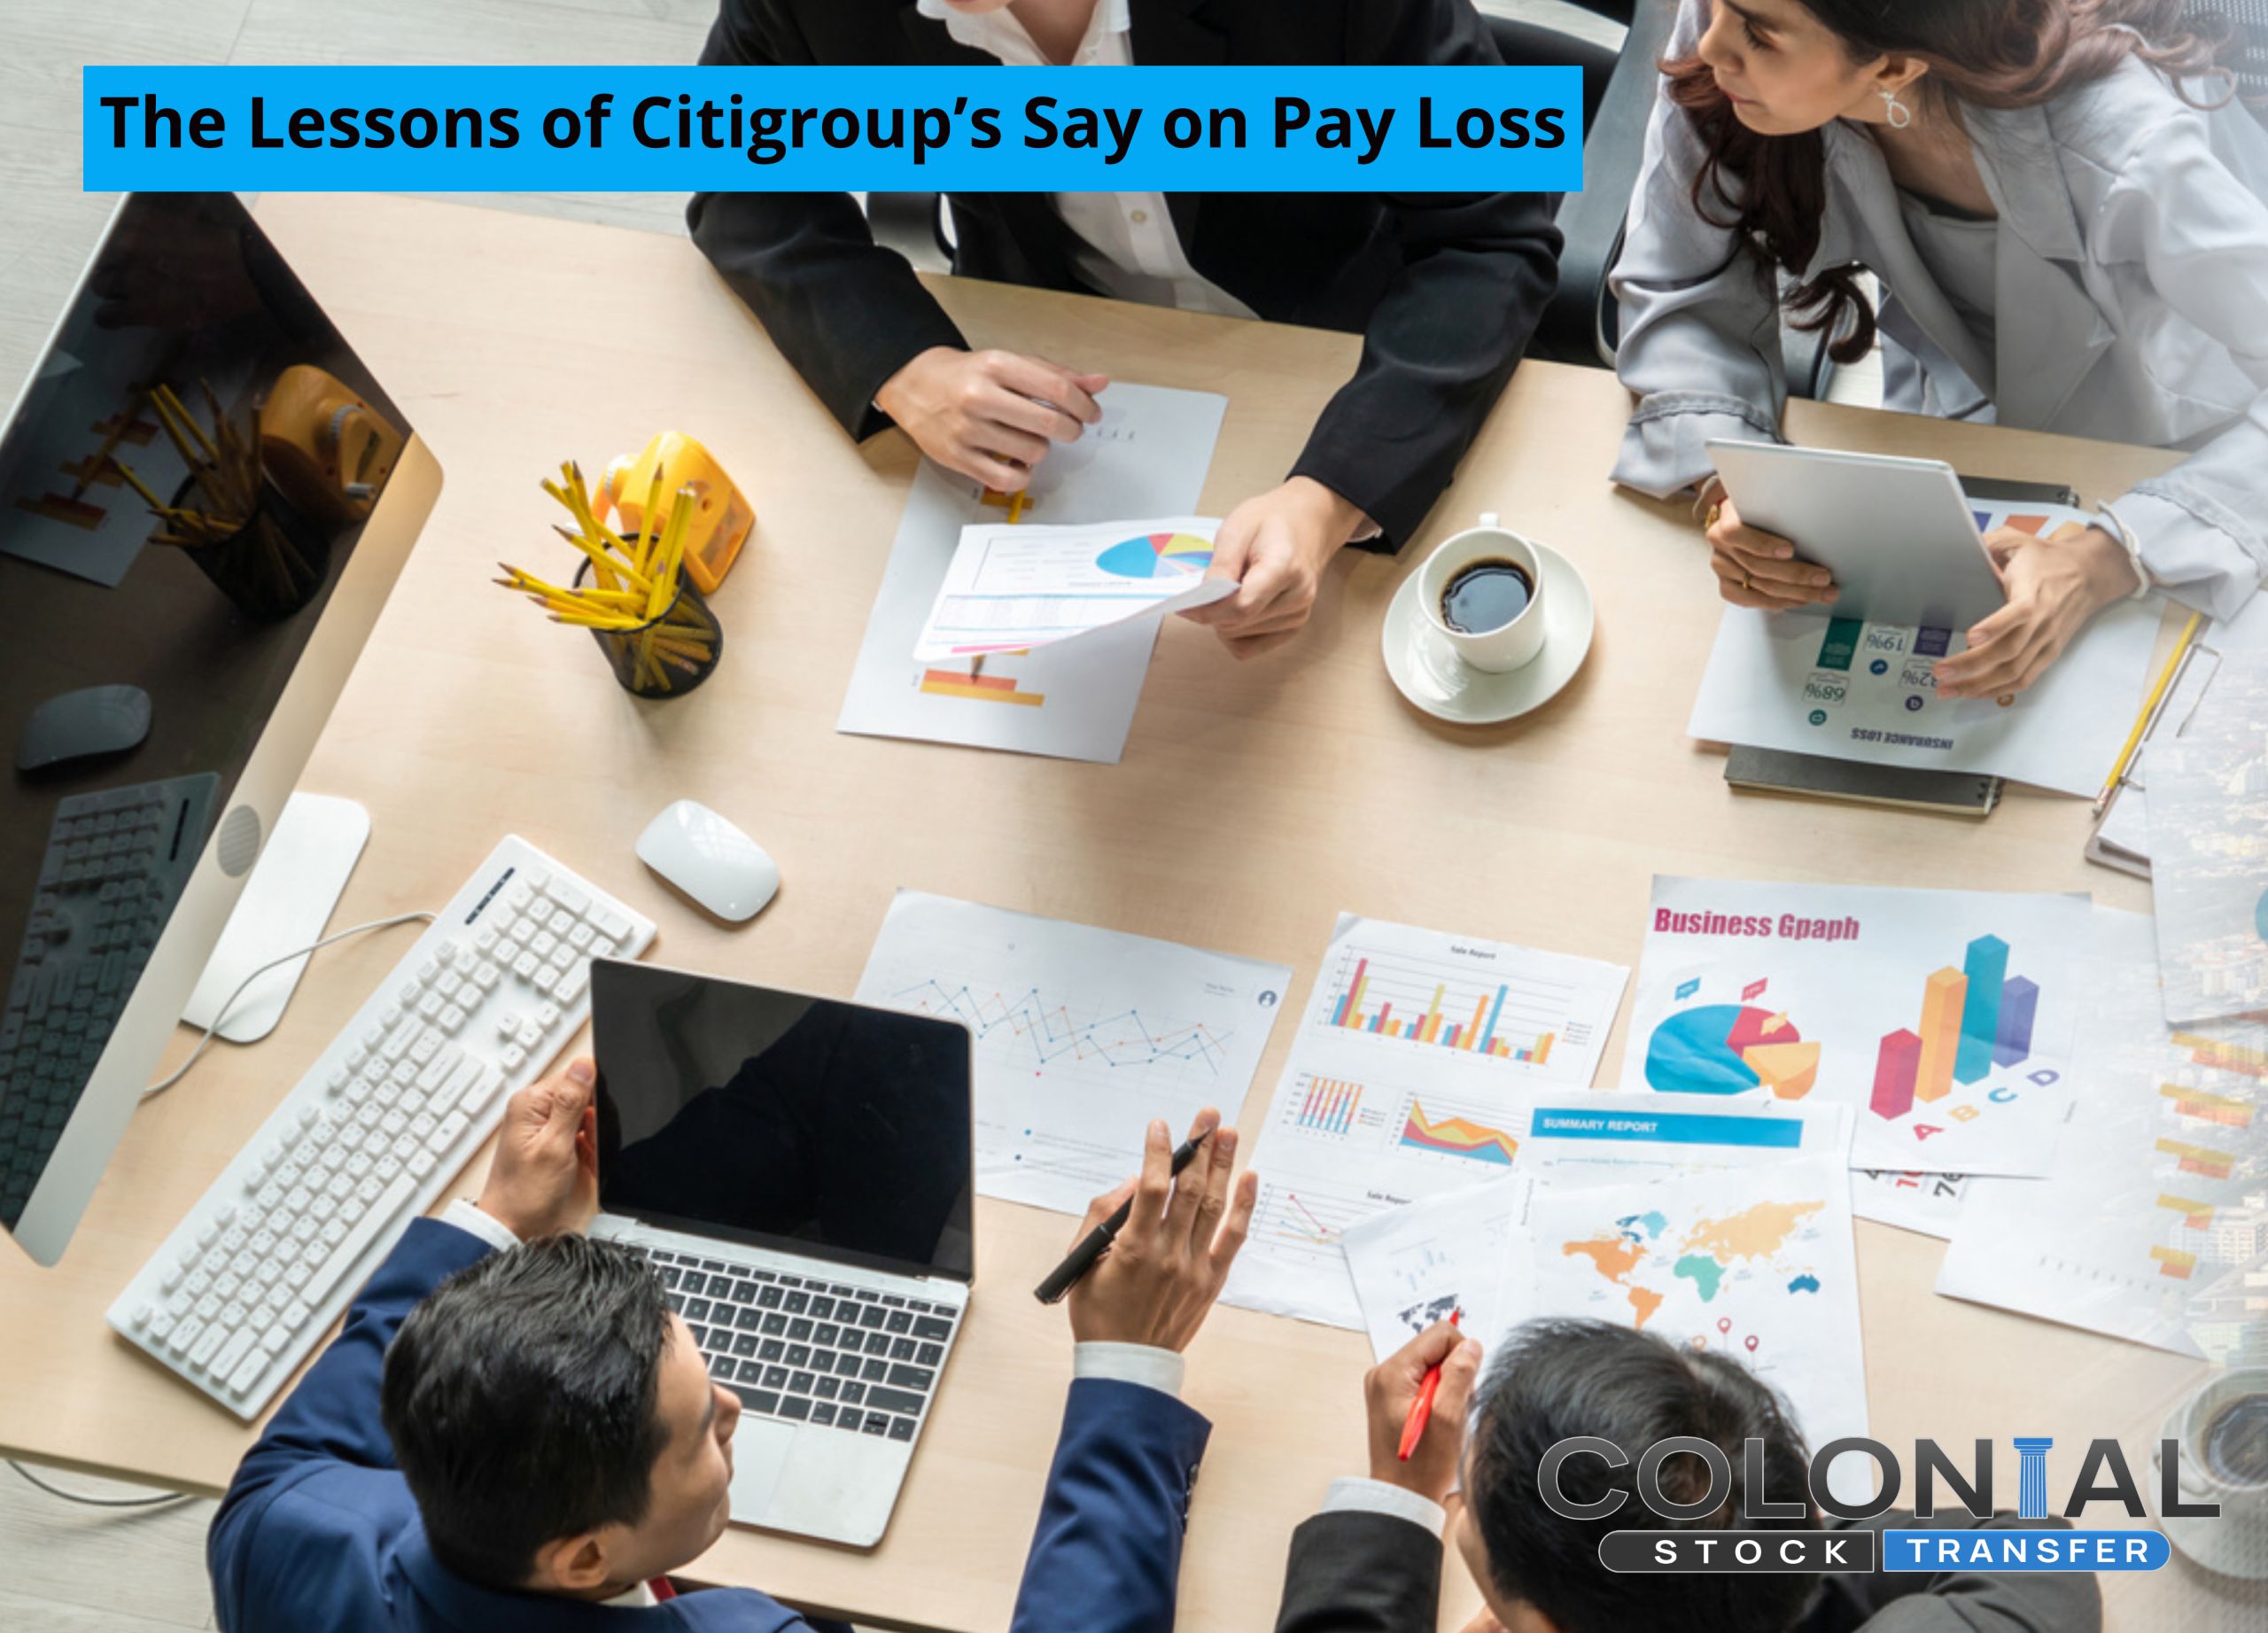 The Lessons of Citigroup’s Say on Pay Loss